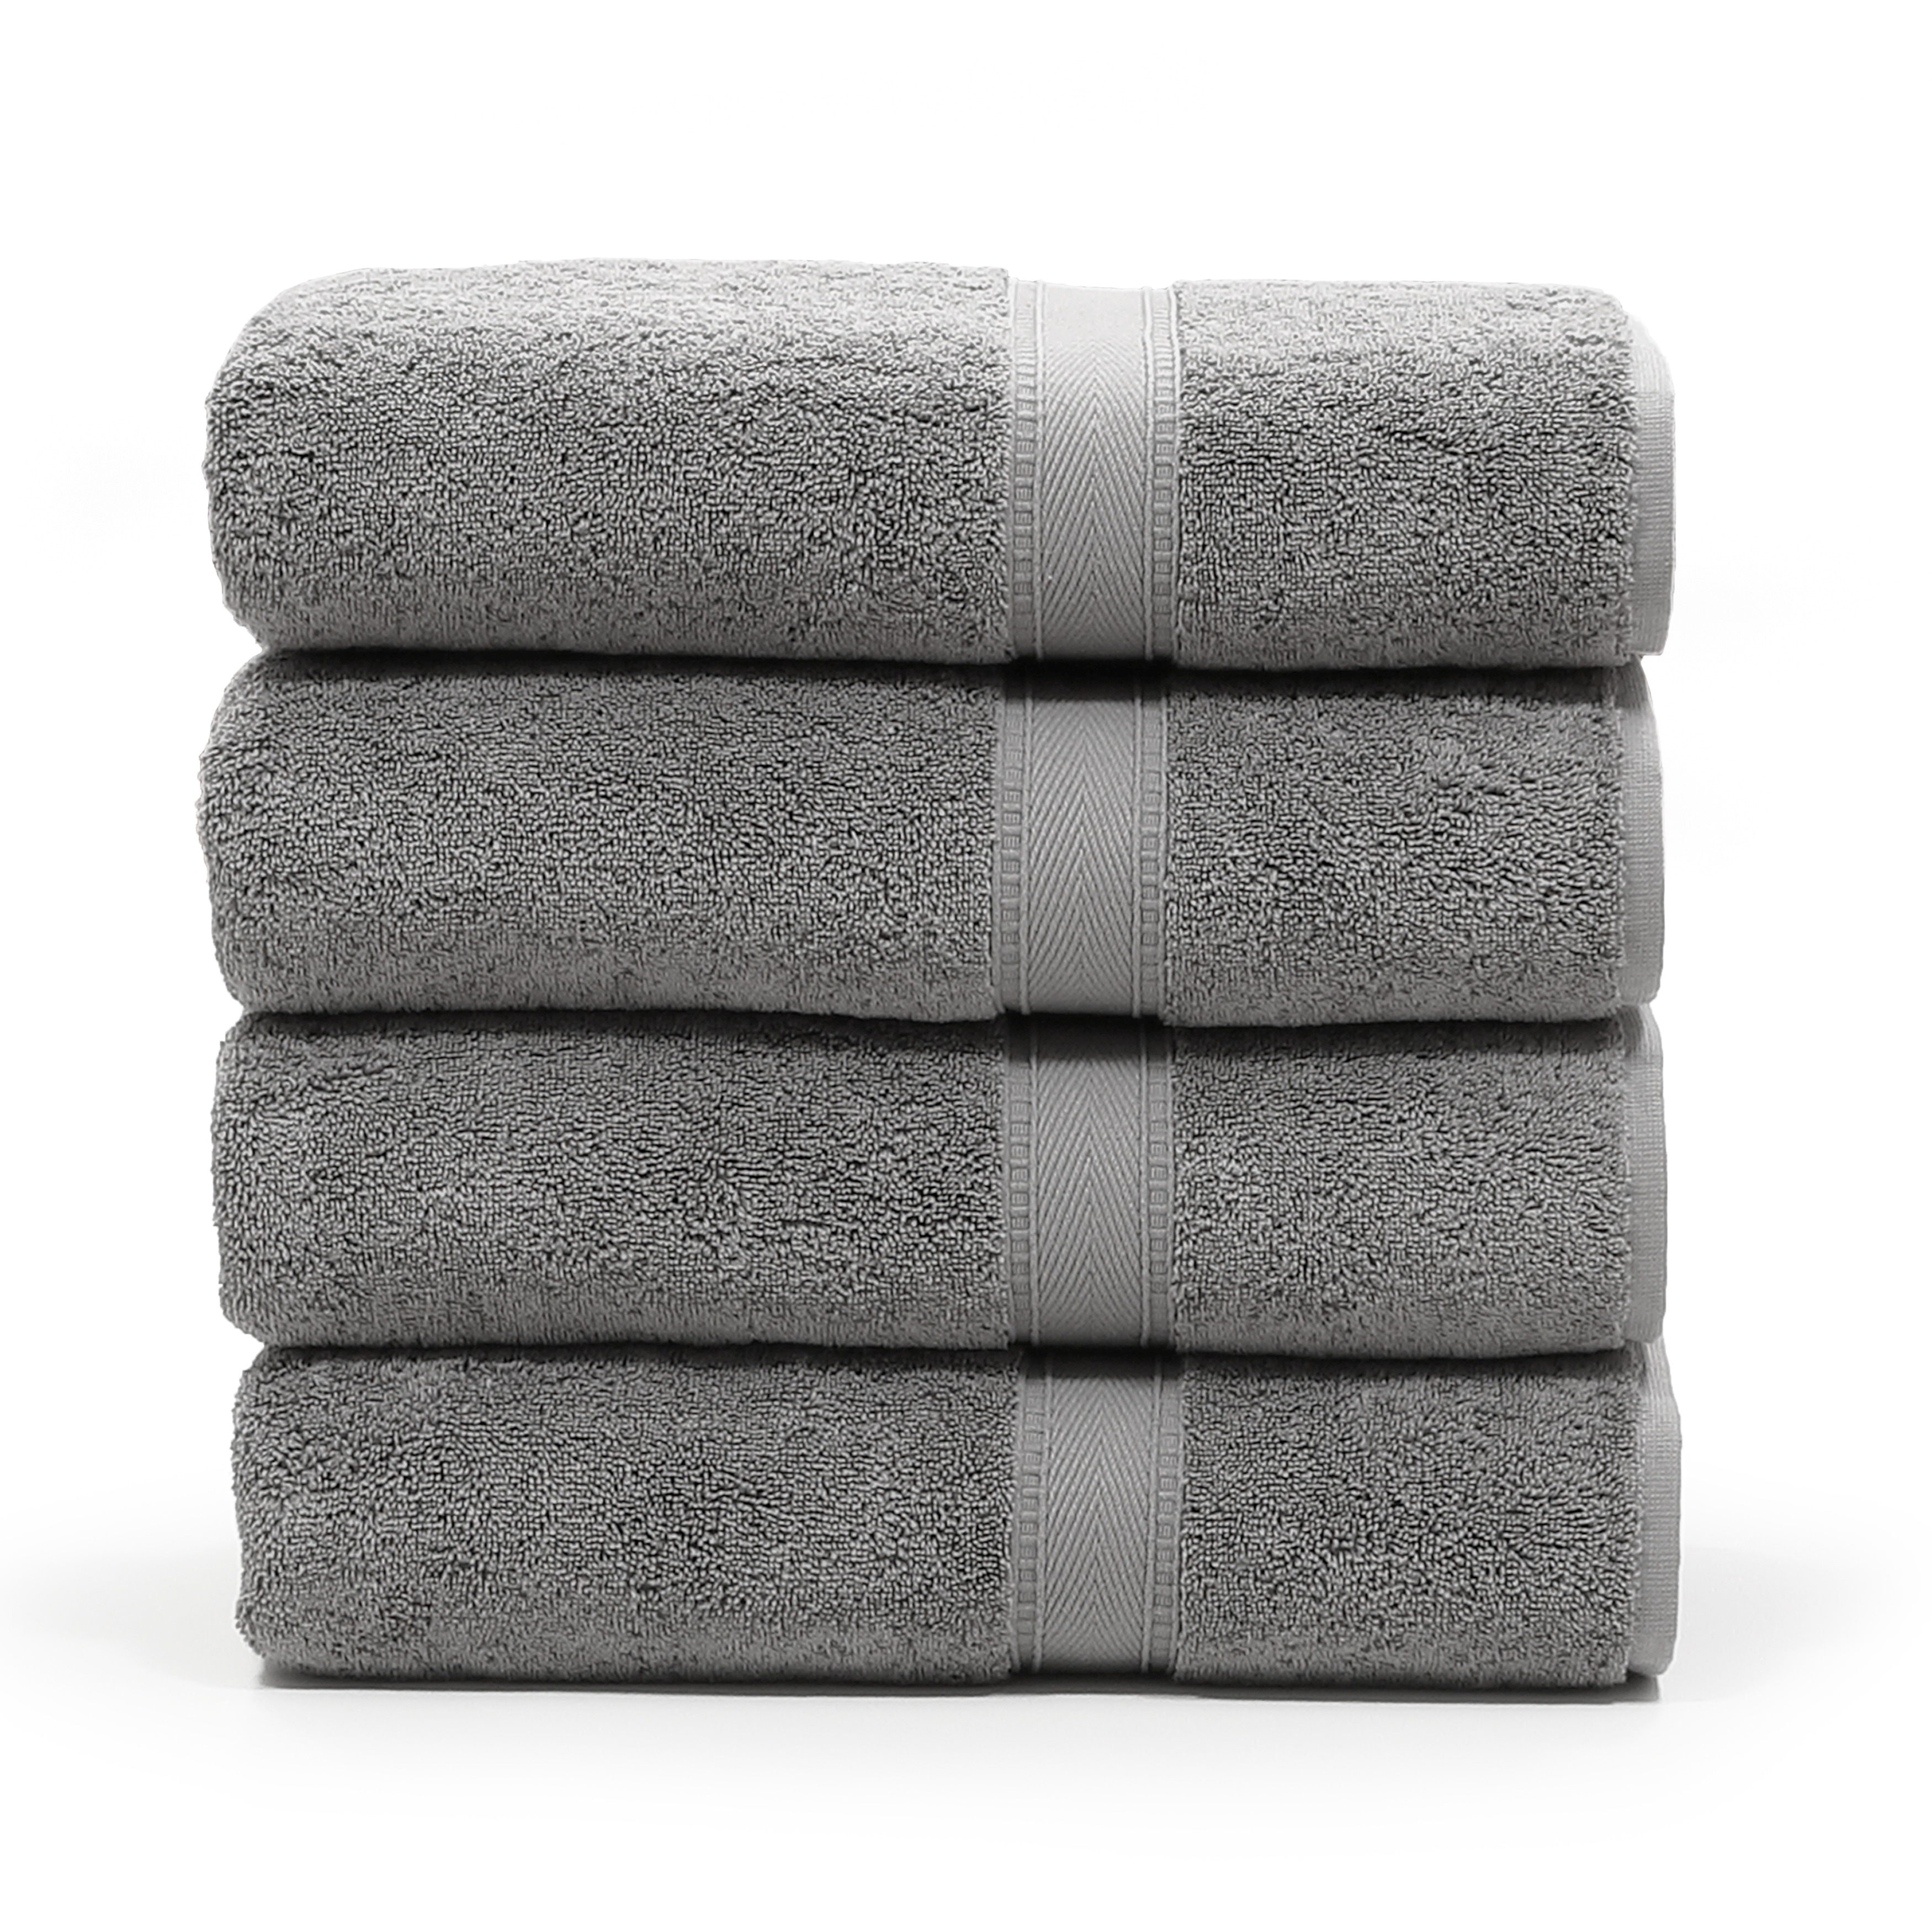 https://ak1.ostkcdn.com/images/products/is/images/direct/8f08f7a0b8d7a8350d9cdf915ead9b05f6fcc85e/Authentic-Hotel-and-Spa-Turkish-Cotton-Bath-Towel-%28Set-of-4%29.jpg